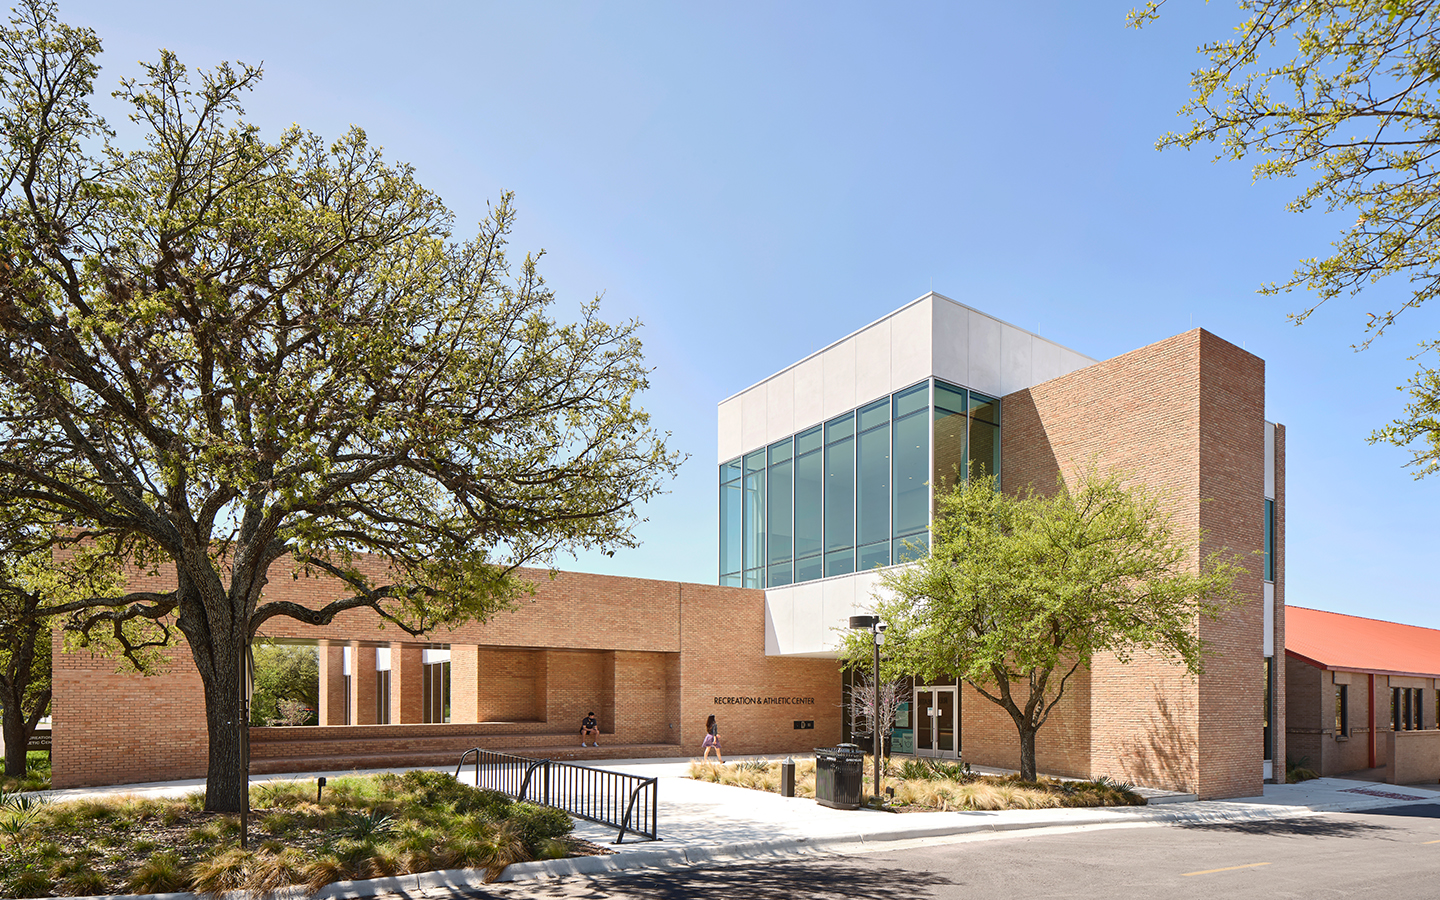 Exterior shot of new extension to Recreation and Athletic Center by Specht Novak Architects. Shot by Andrea Calo.